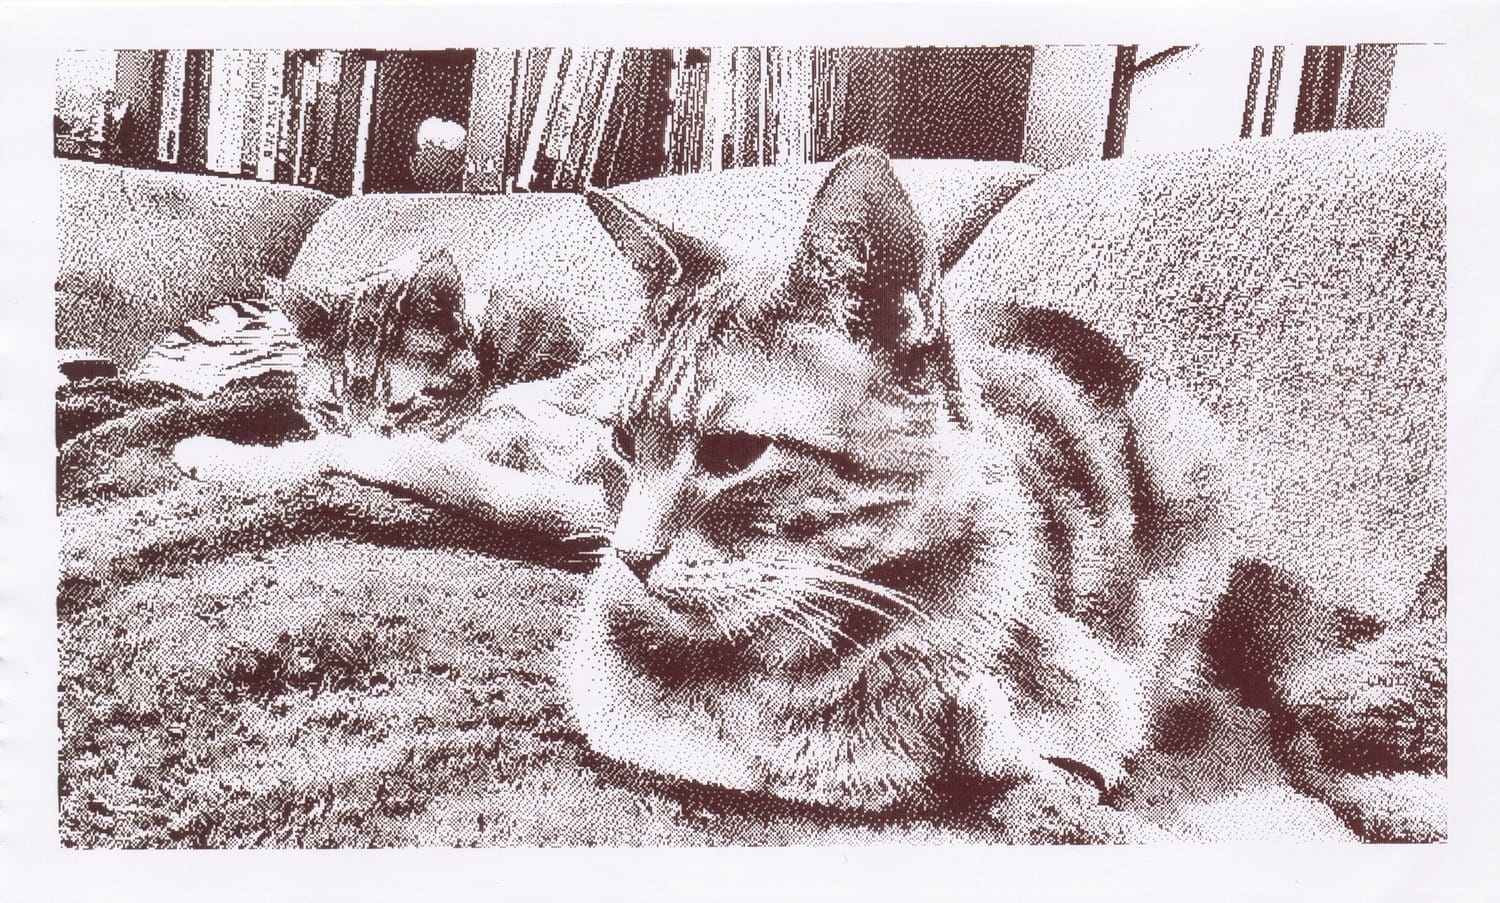 Grayscale thermal printed image of 2 cats sitting on a blanket on a couch